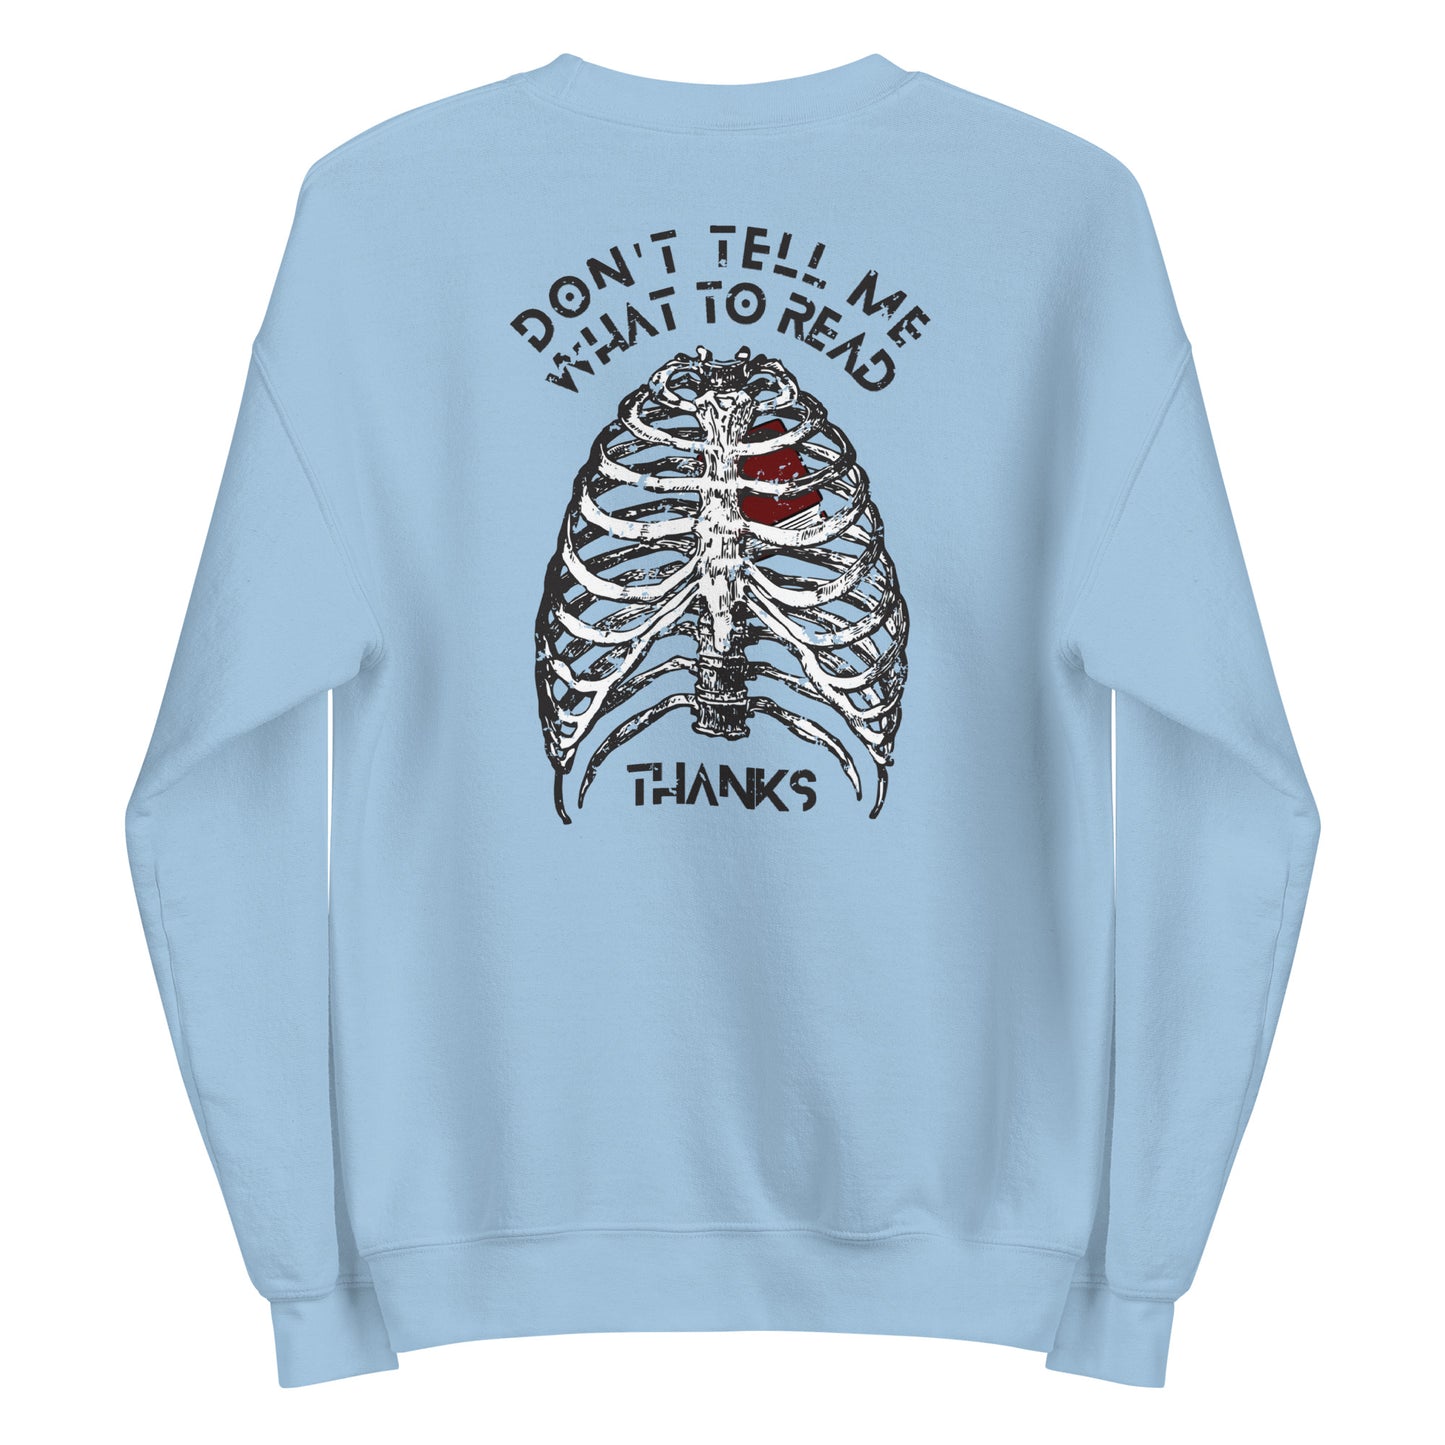 don't tell me what to read sweatshirt